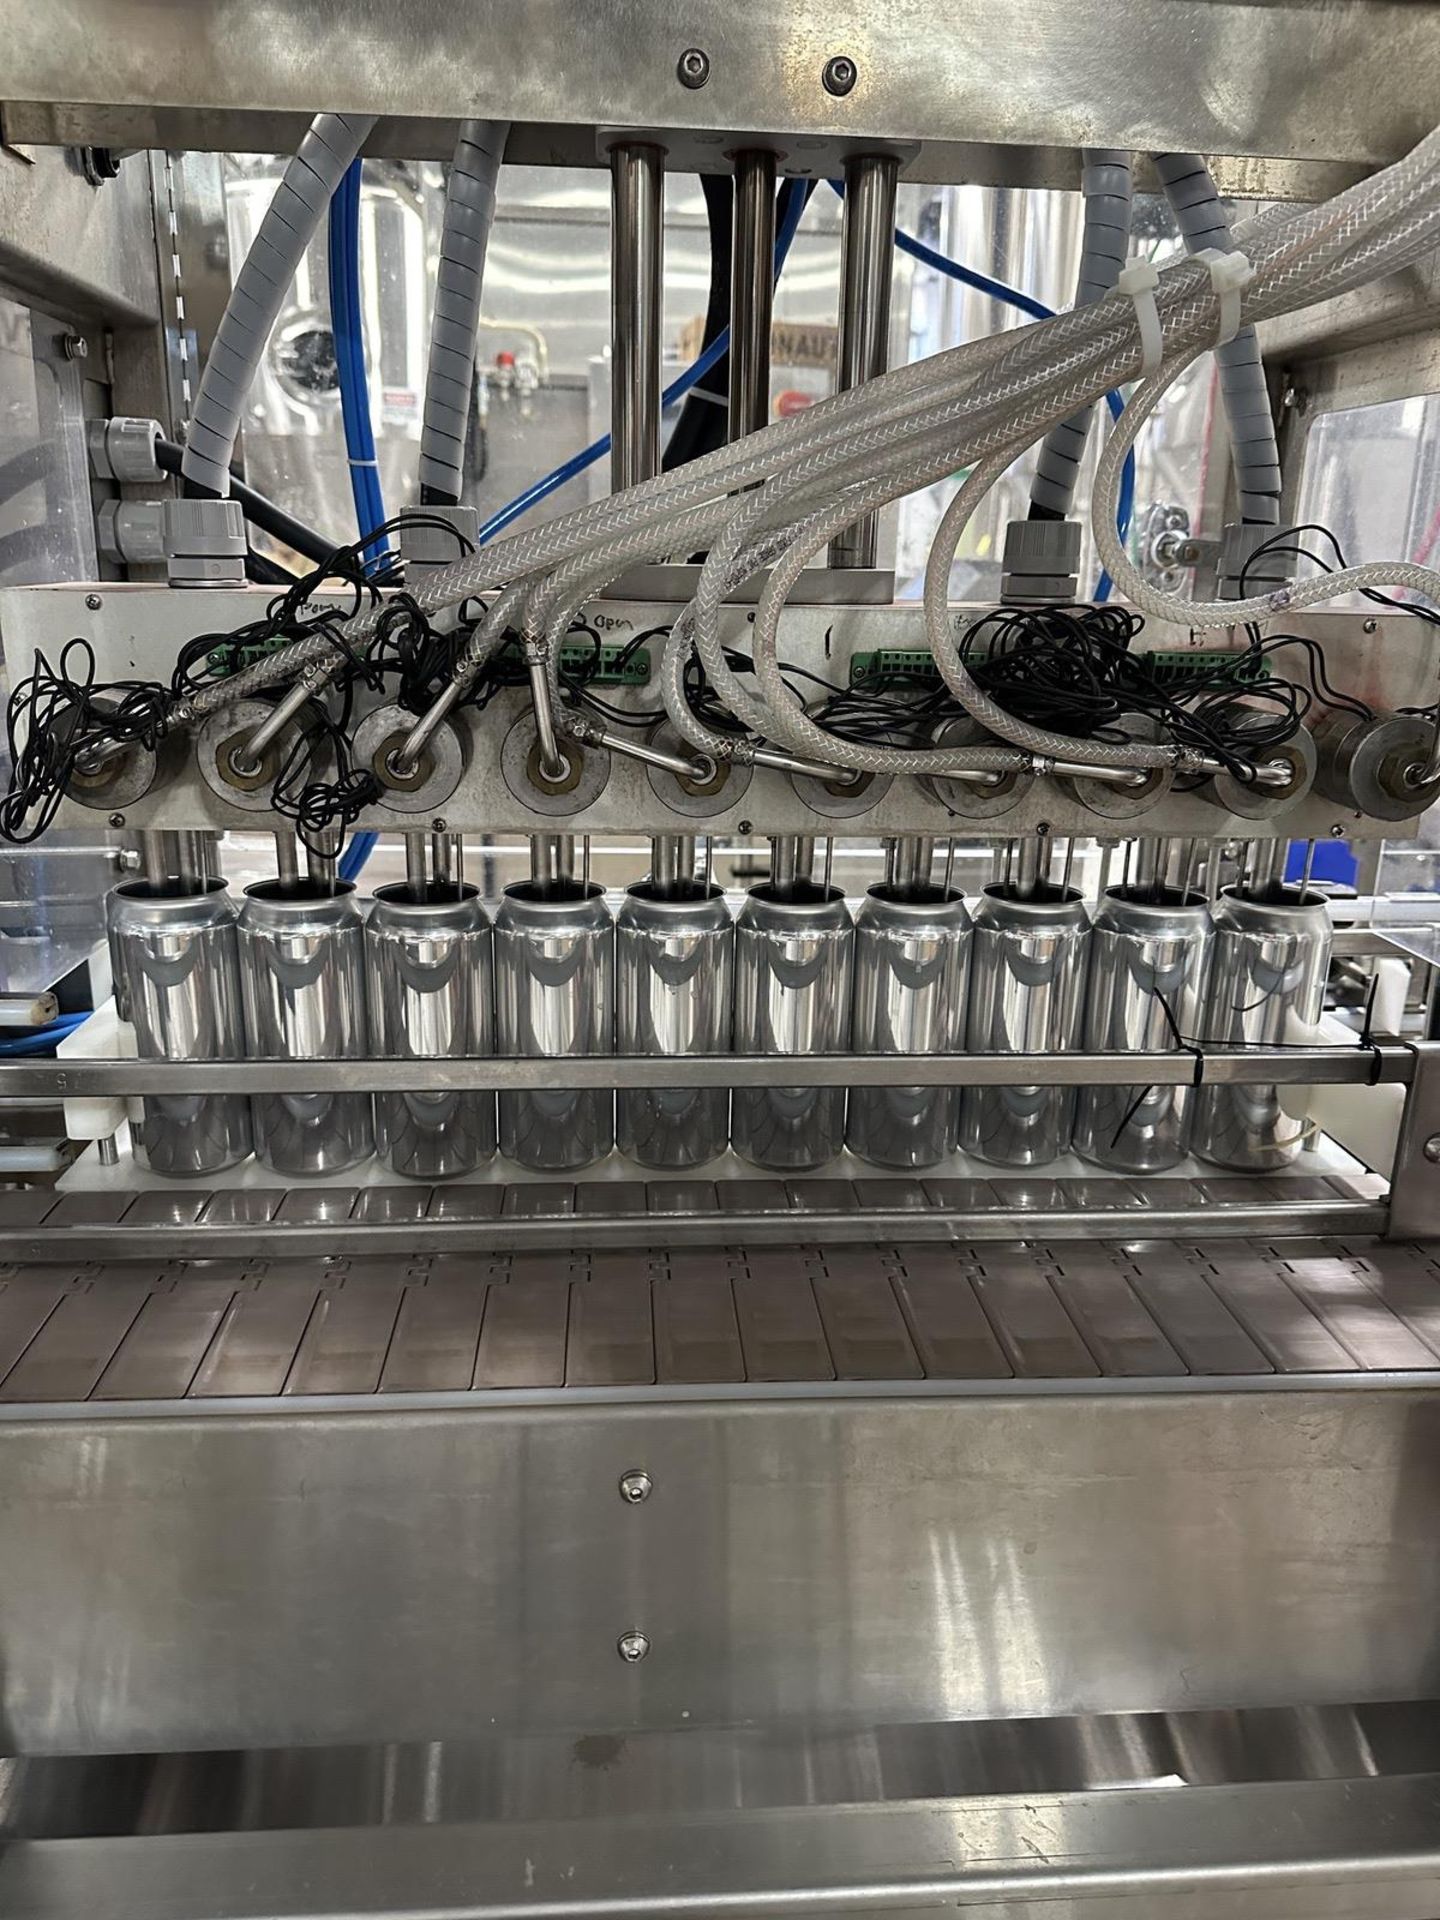 2018 Cask X2-100 10-Head Filler with 2-Head Seamer Can Filling System s/n X2017-026- | Rig Fee $1200 - Image 3 of 11